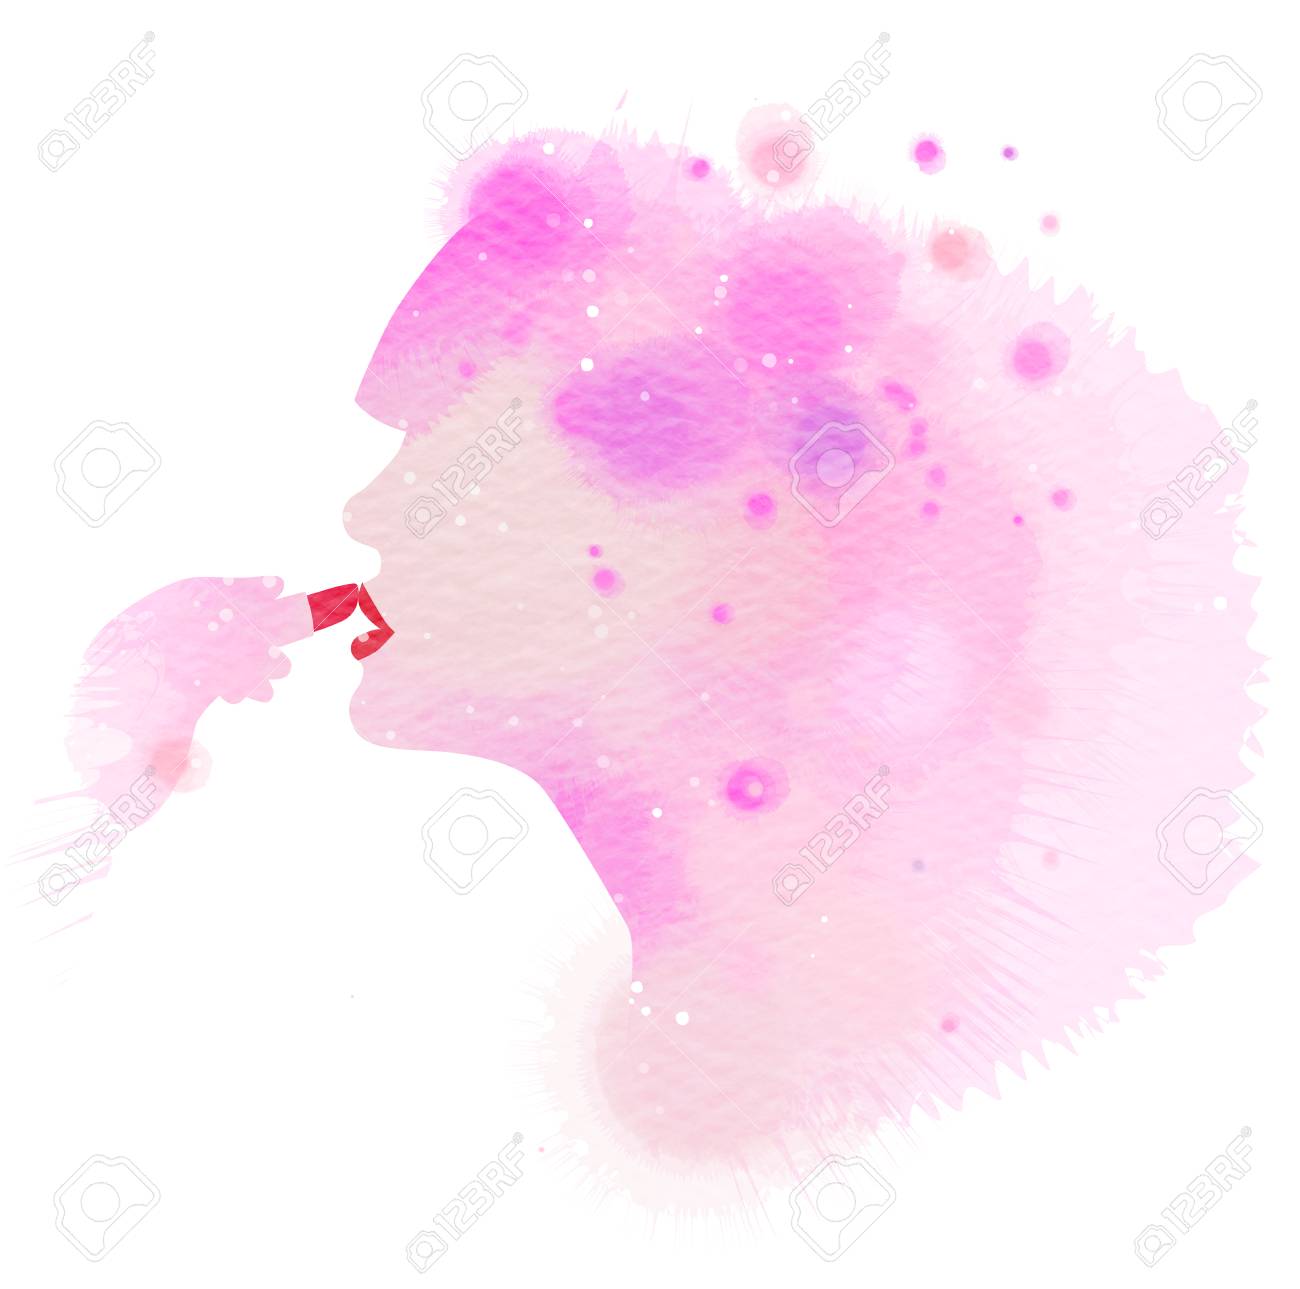 Fashion icon girl silhouette plus abstract water color. Digital art painting.